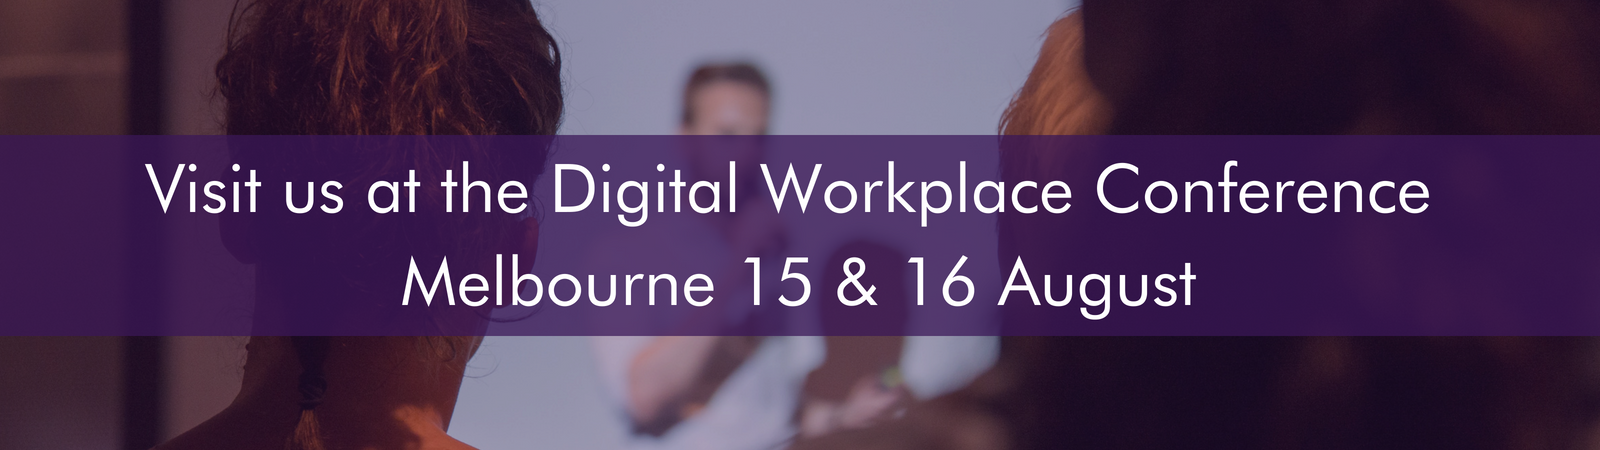 The Digital Workplace Conference Australia